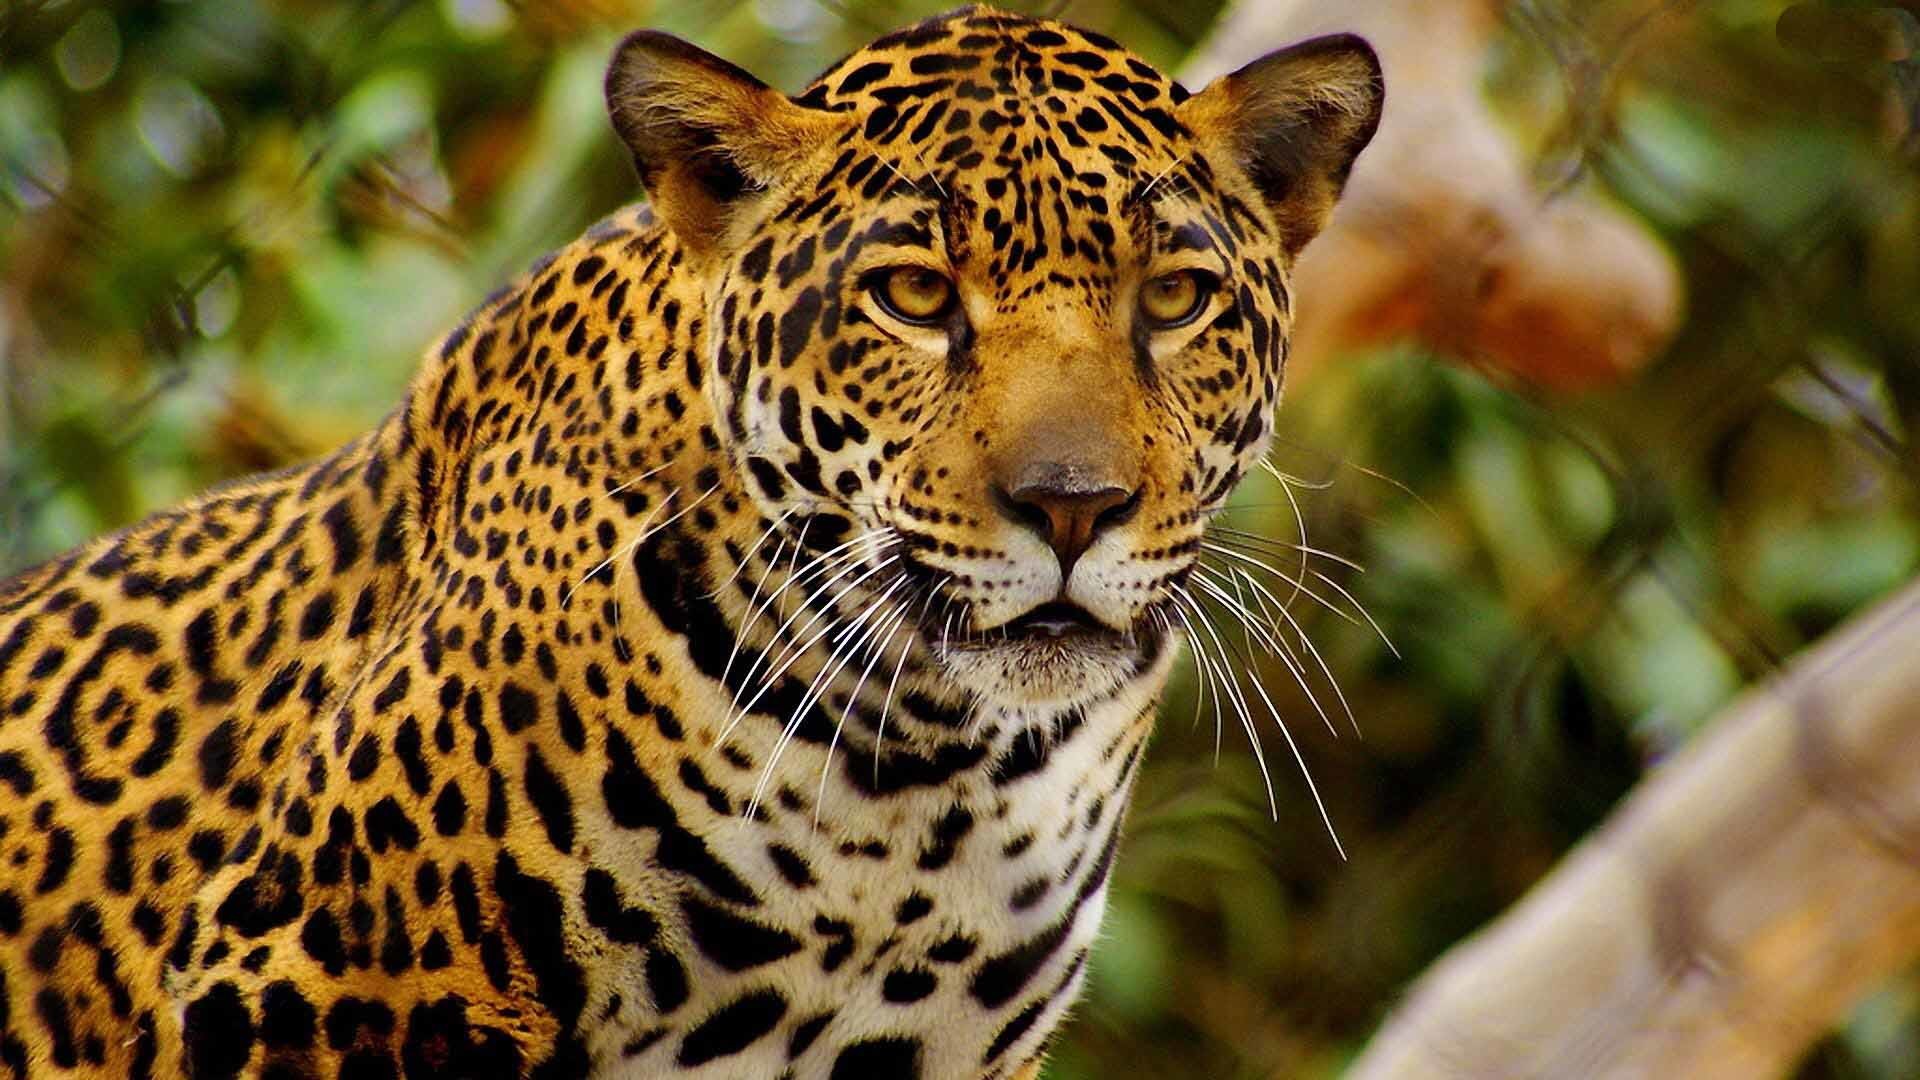 1920x1080 Jaguar animal black and white hd wallpapers for desktop and laptop .